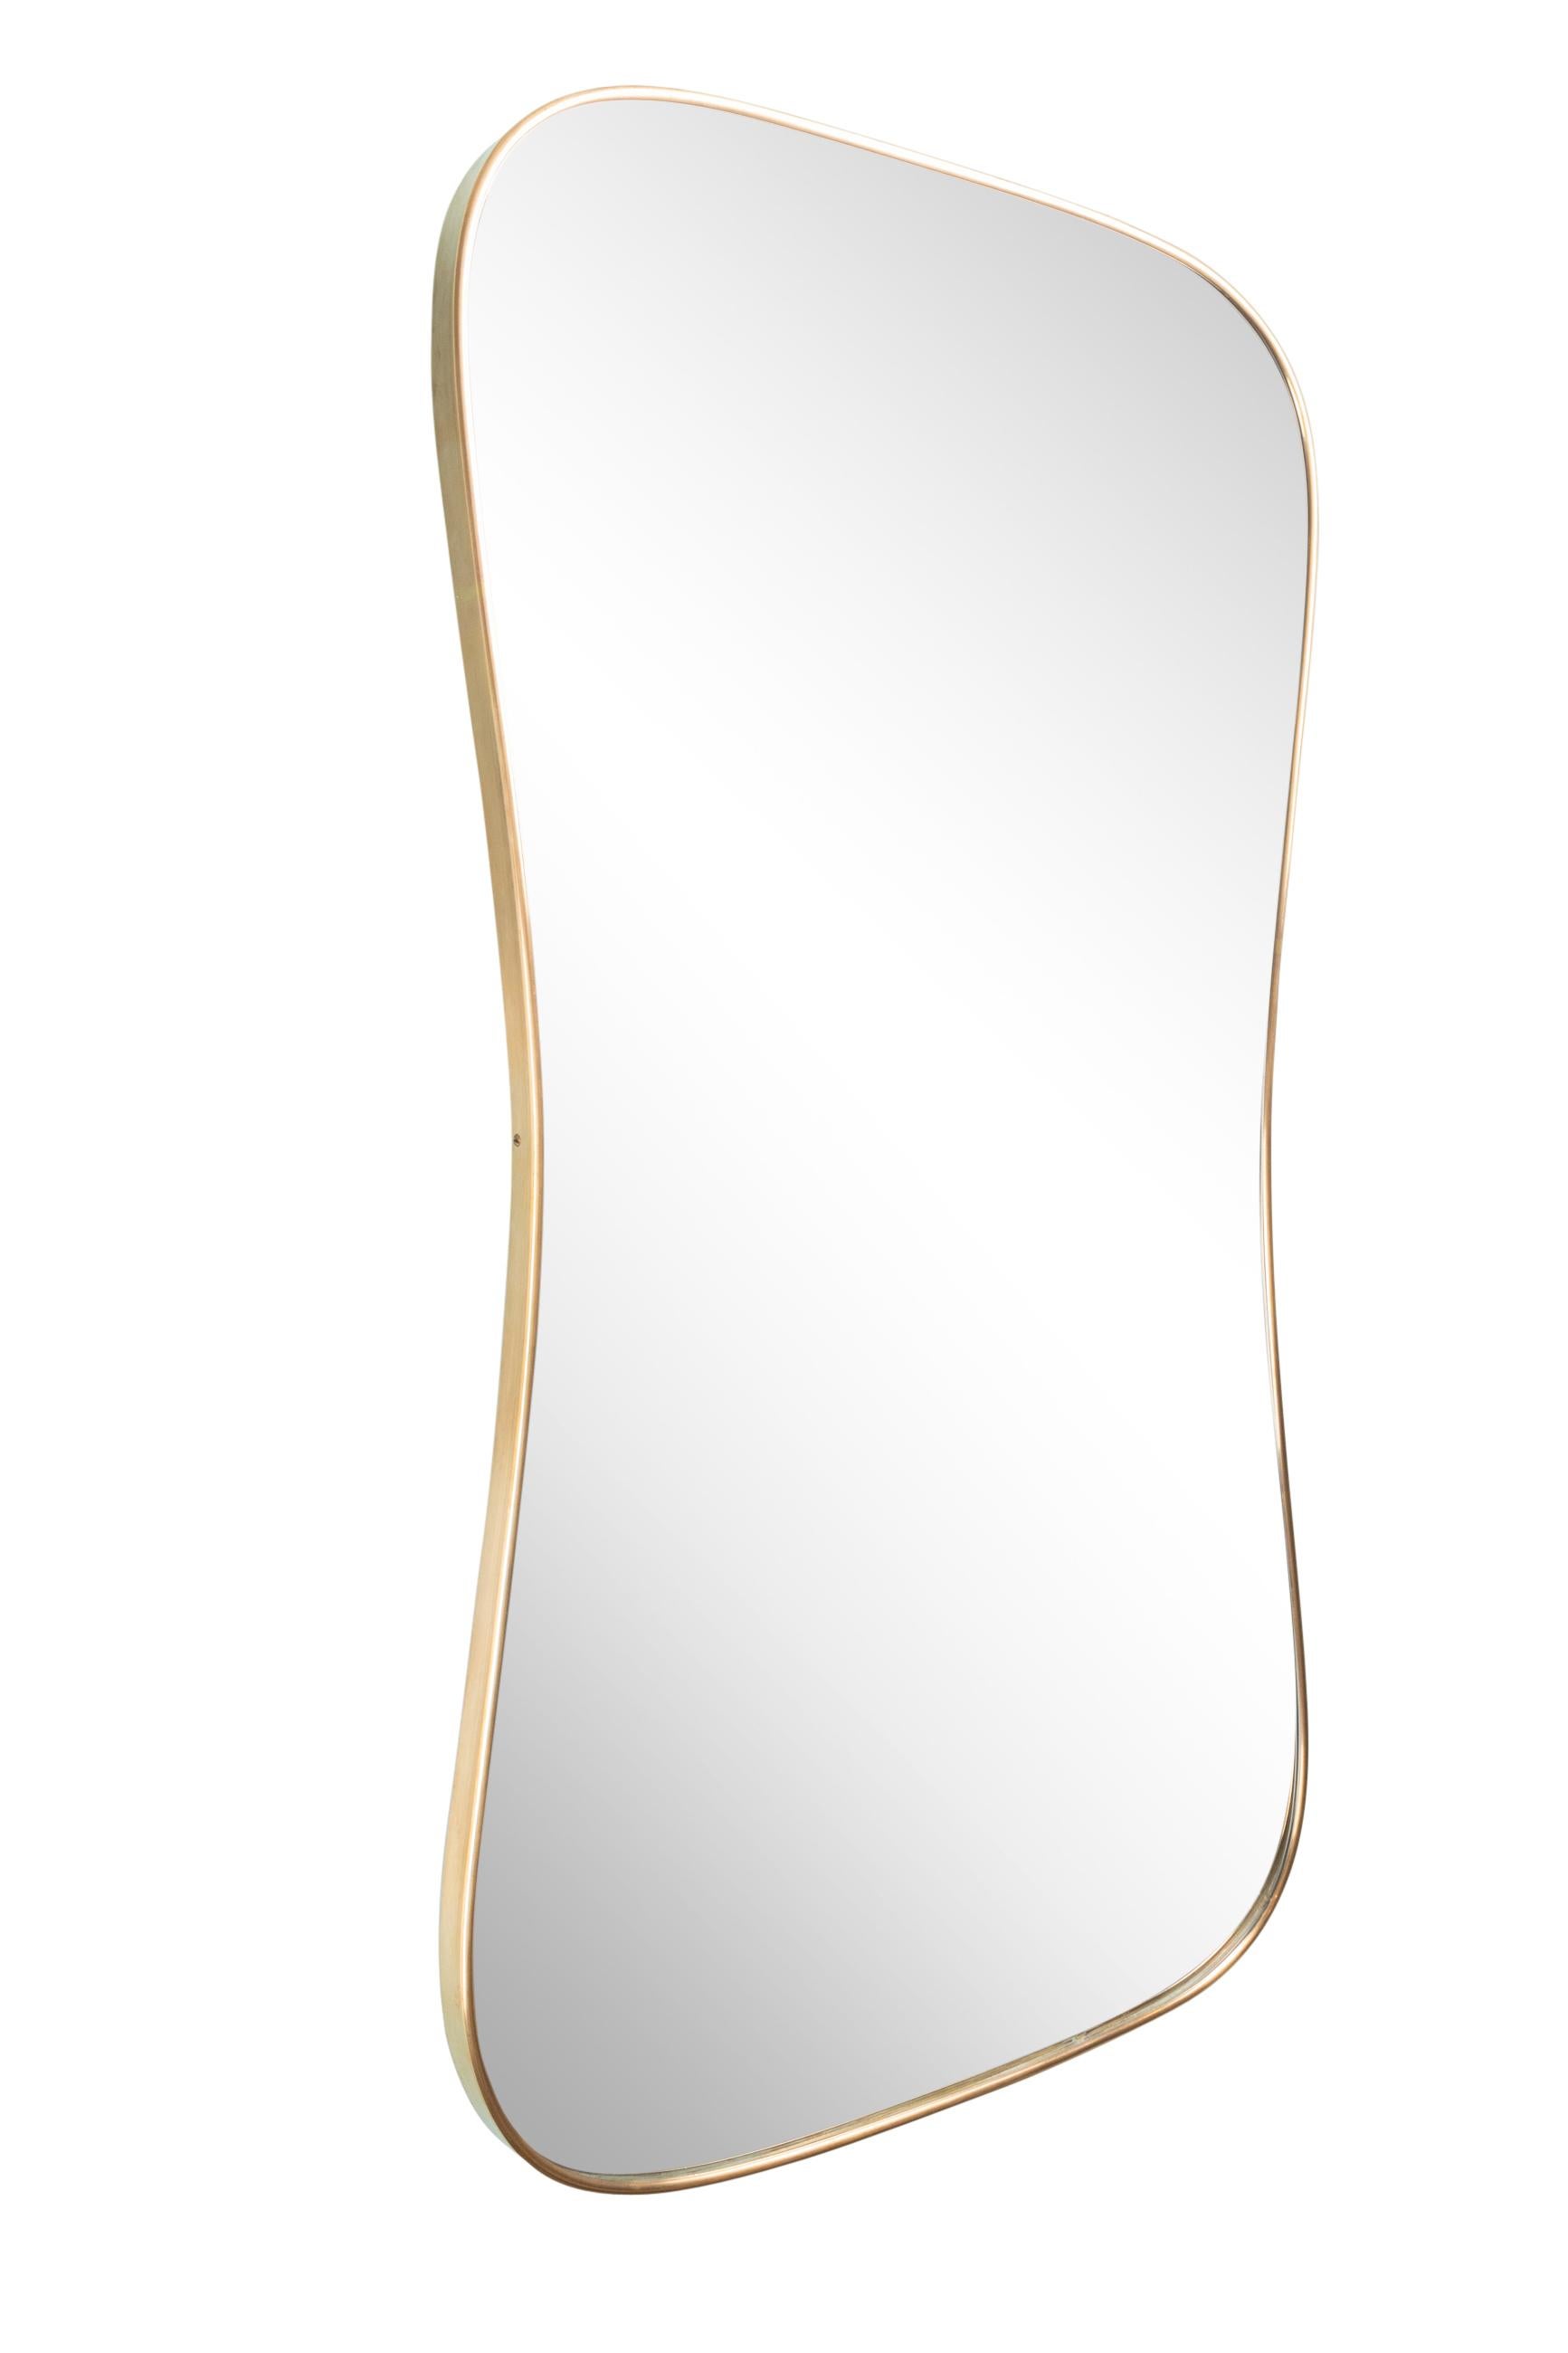 Italian Brass Framed Mirror in the Style of Gio Ponti, Italy, 1950's For Sale